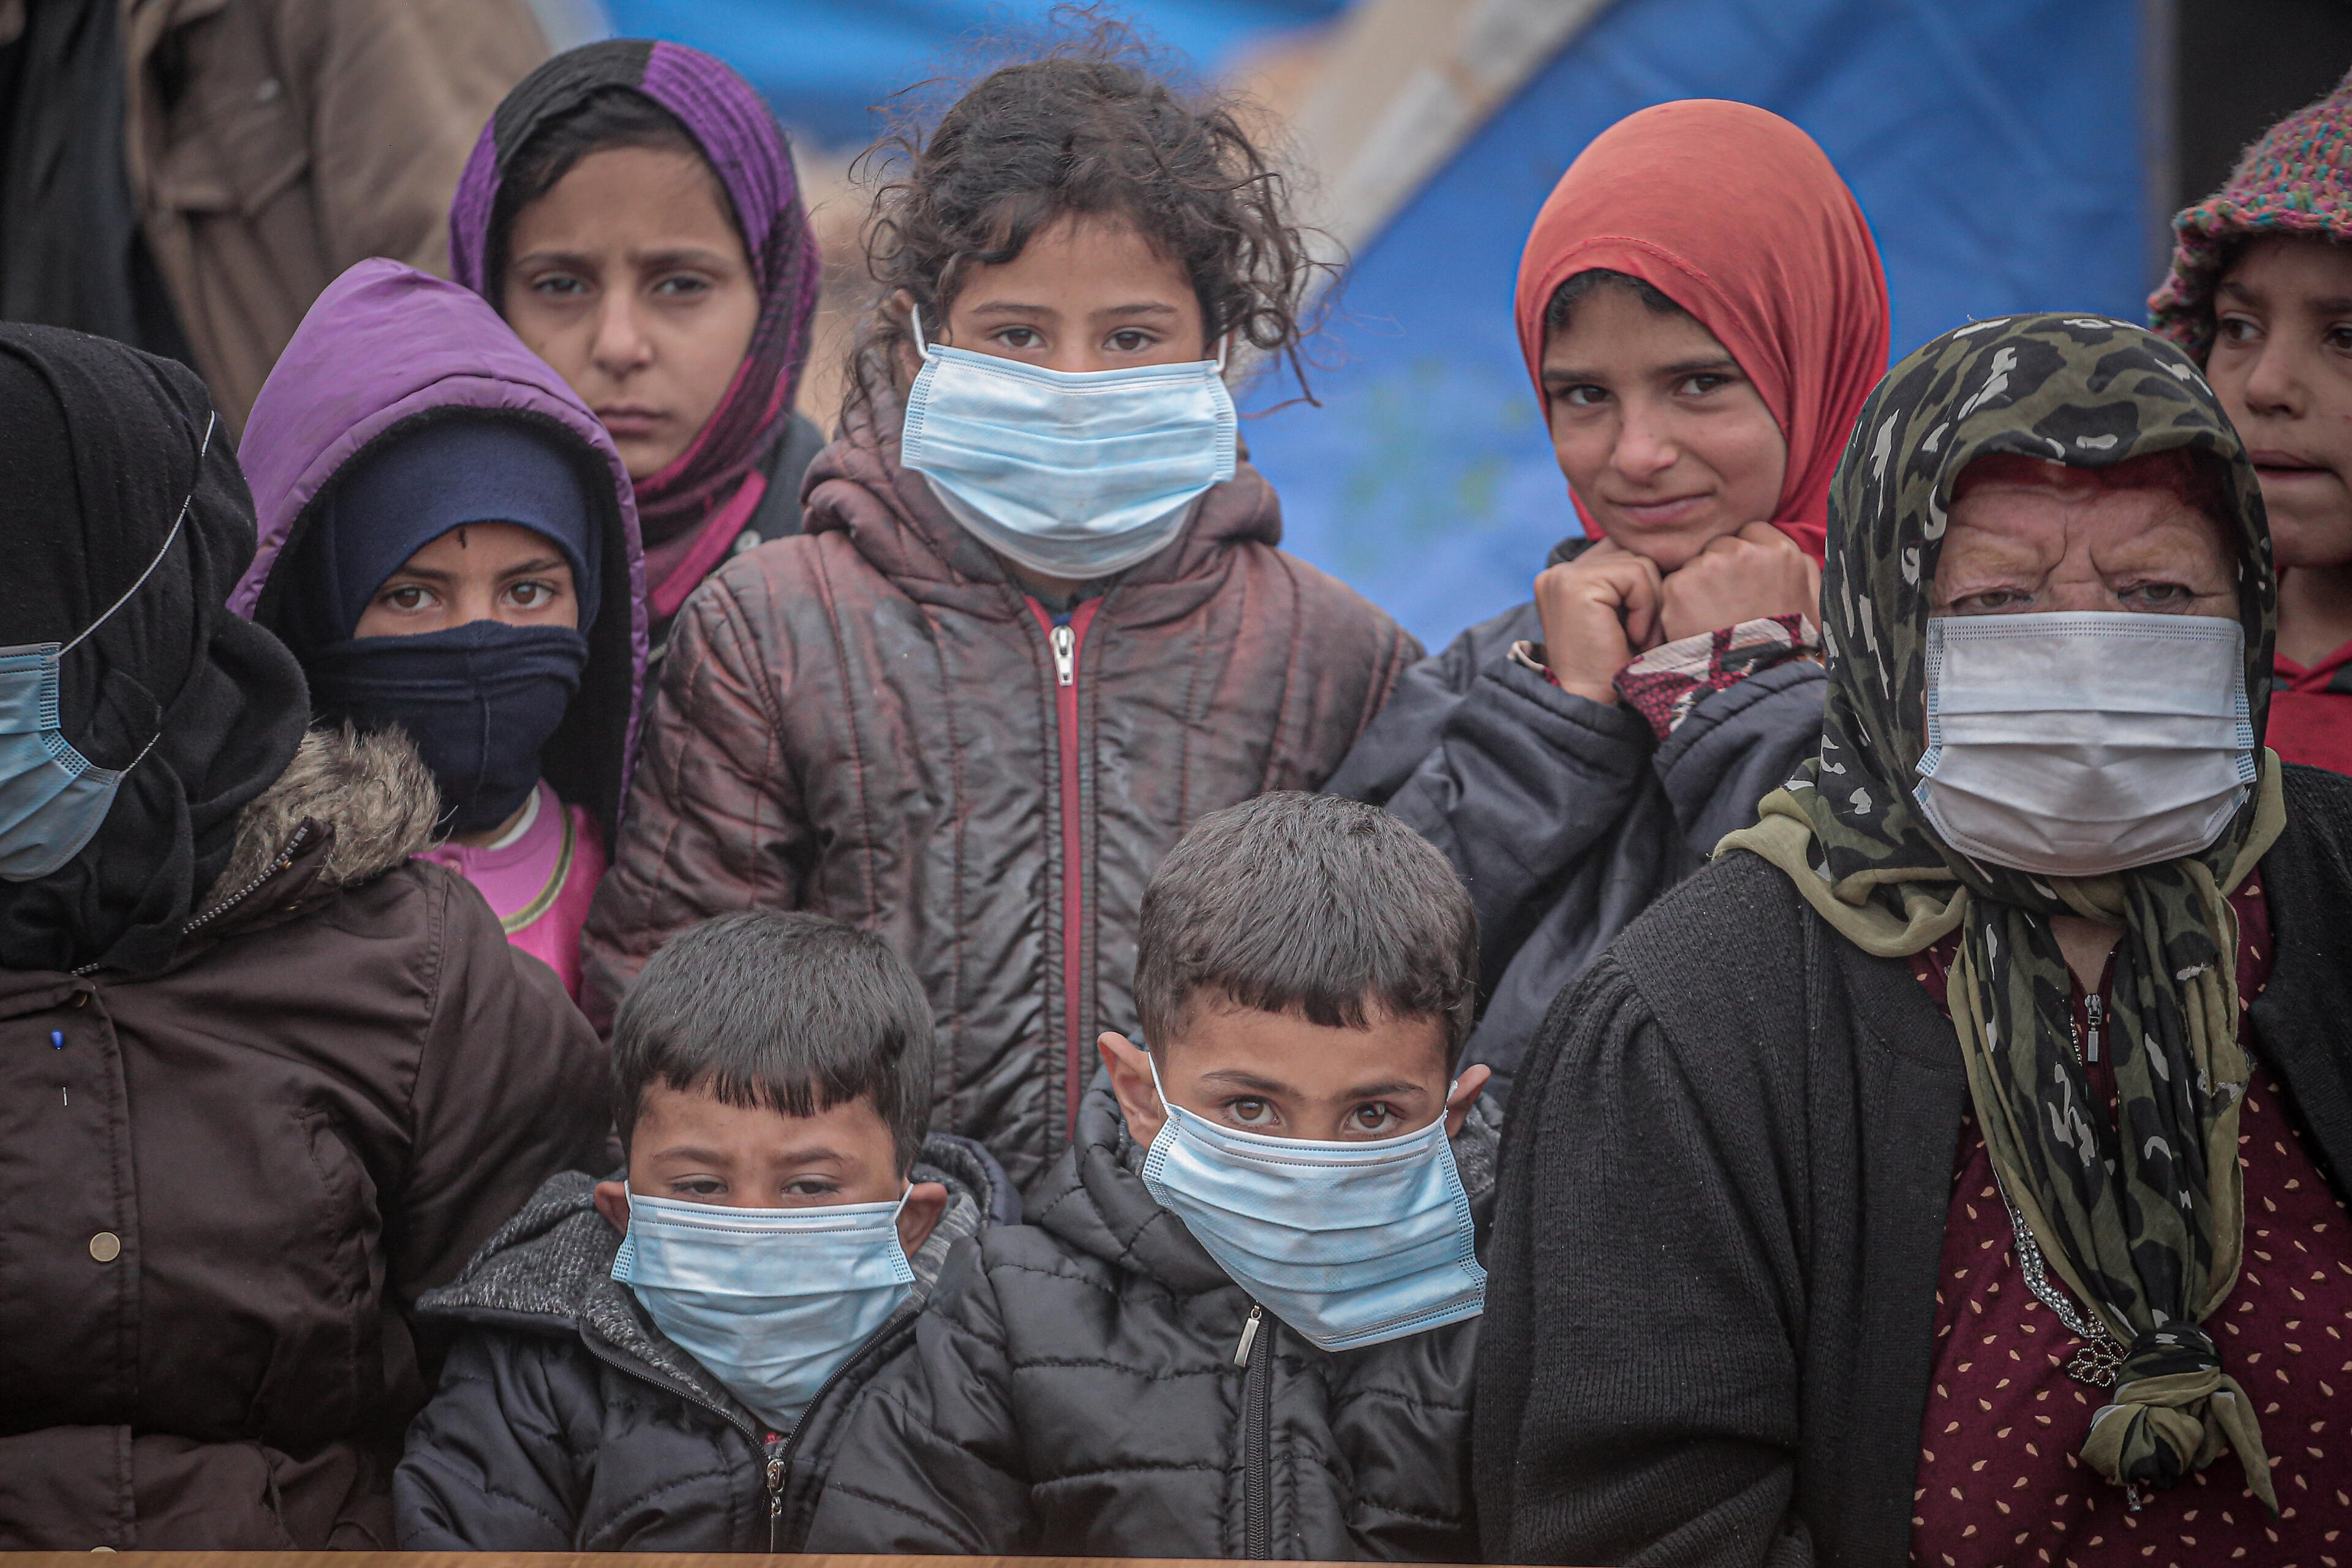 A group of displaced children with an older woman wearing face masks during the COVID-19 pandemic